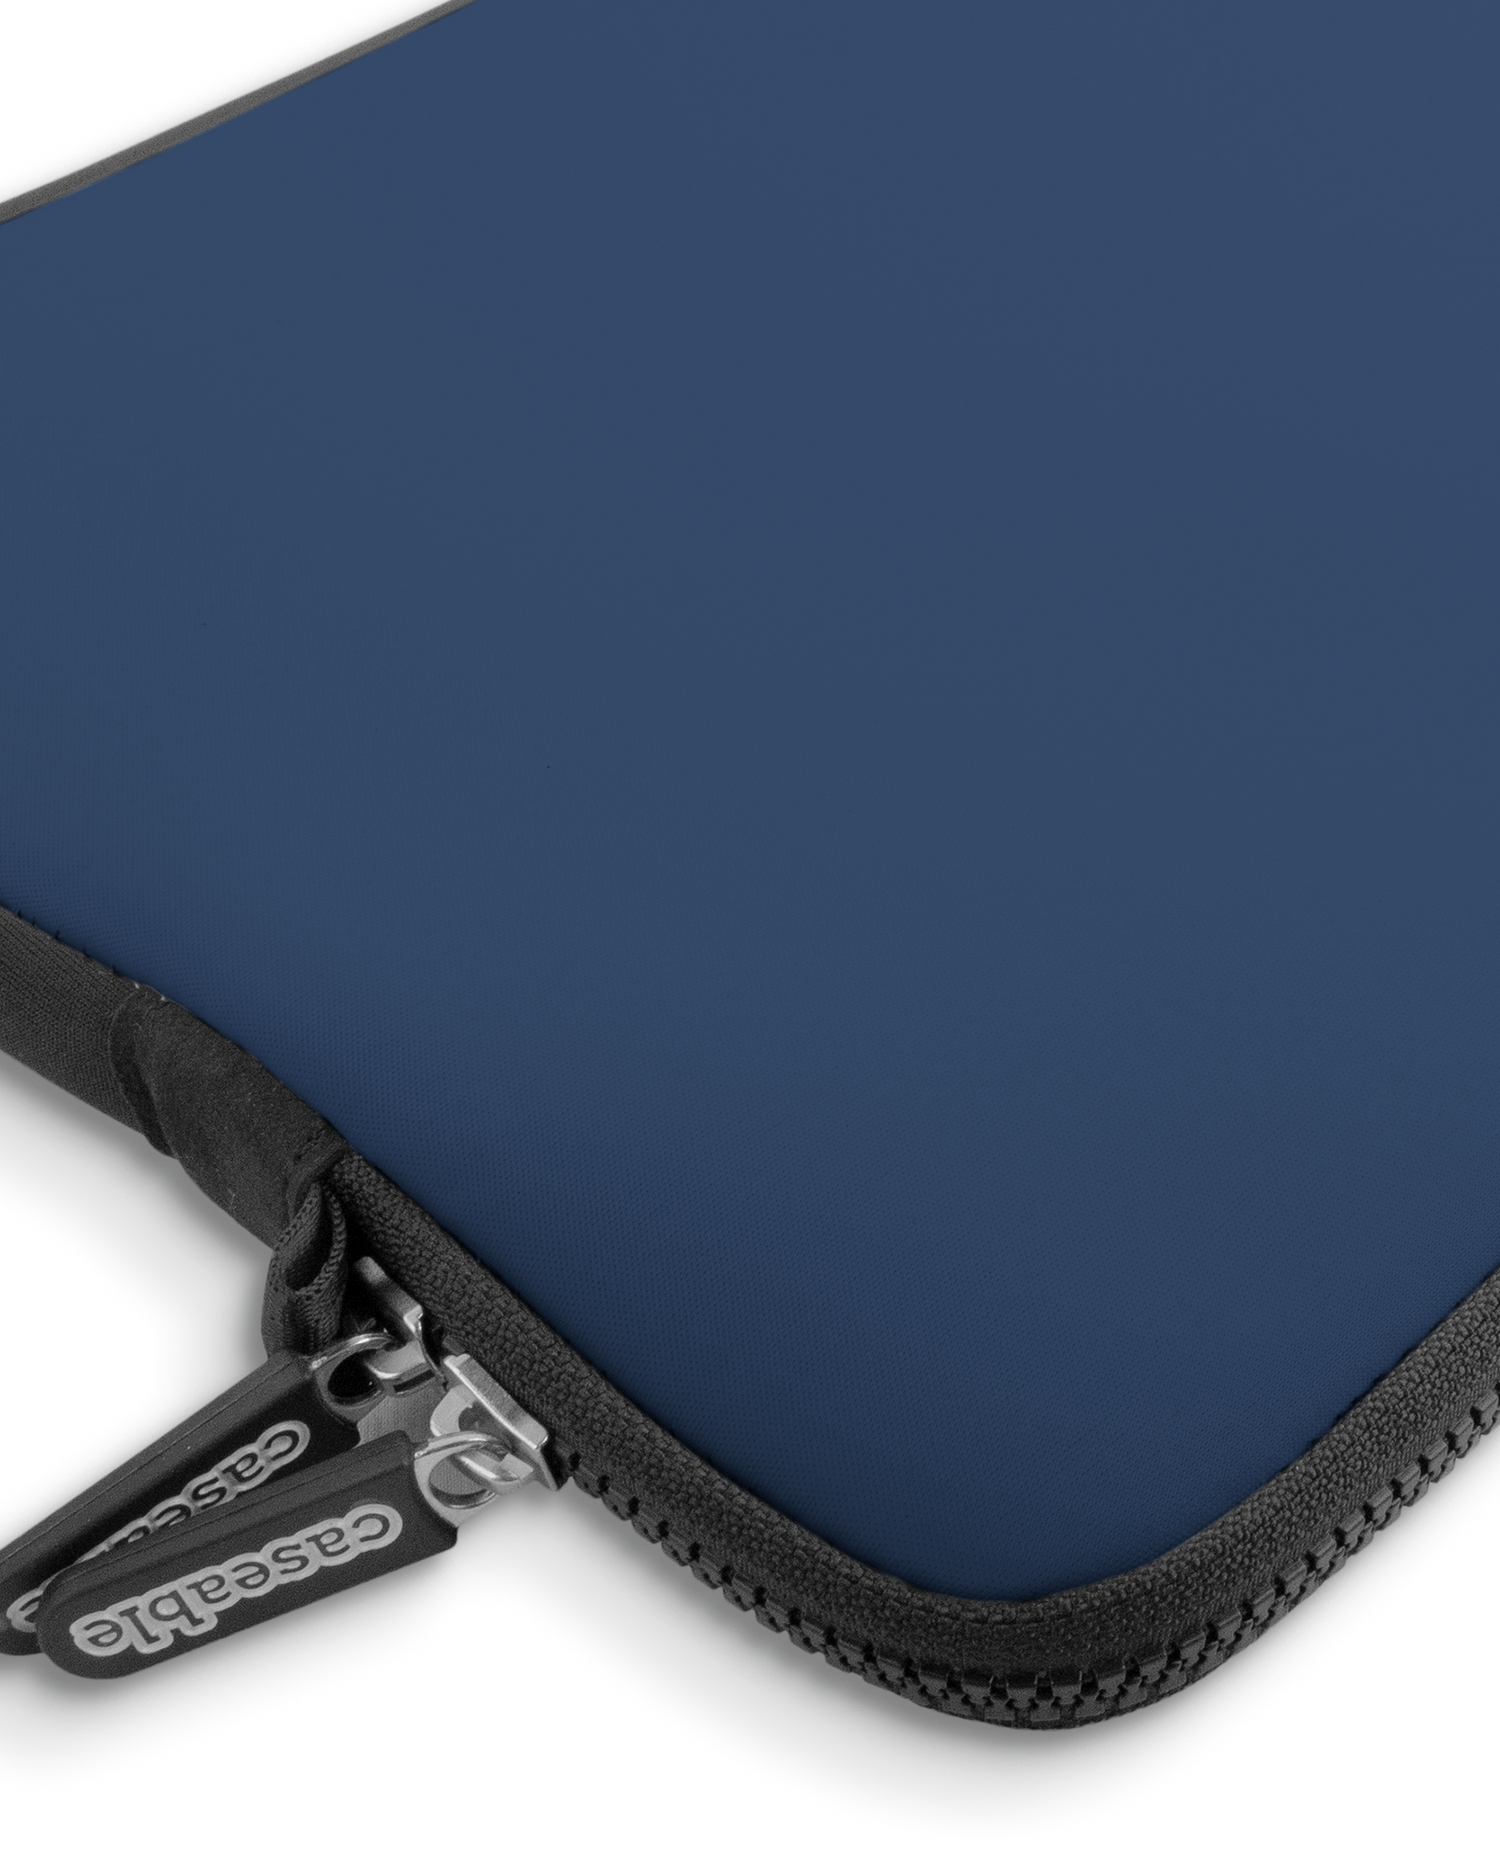 NAVY Premium Laptop Bag 13-14 inch with device inside